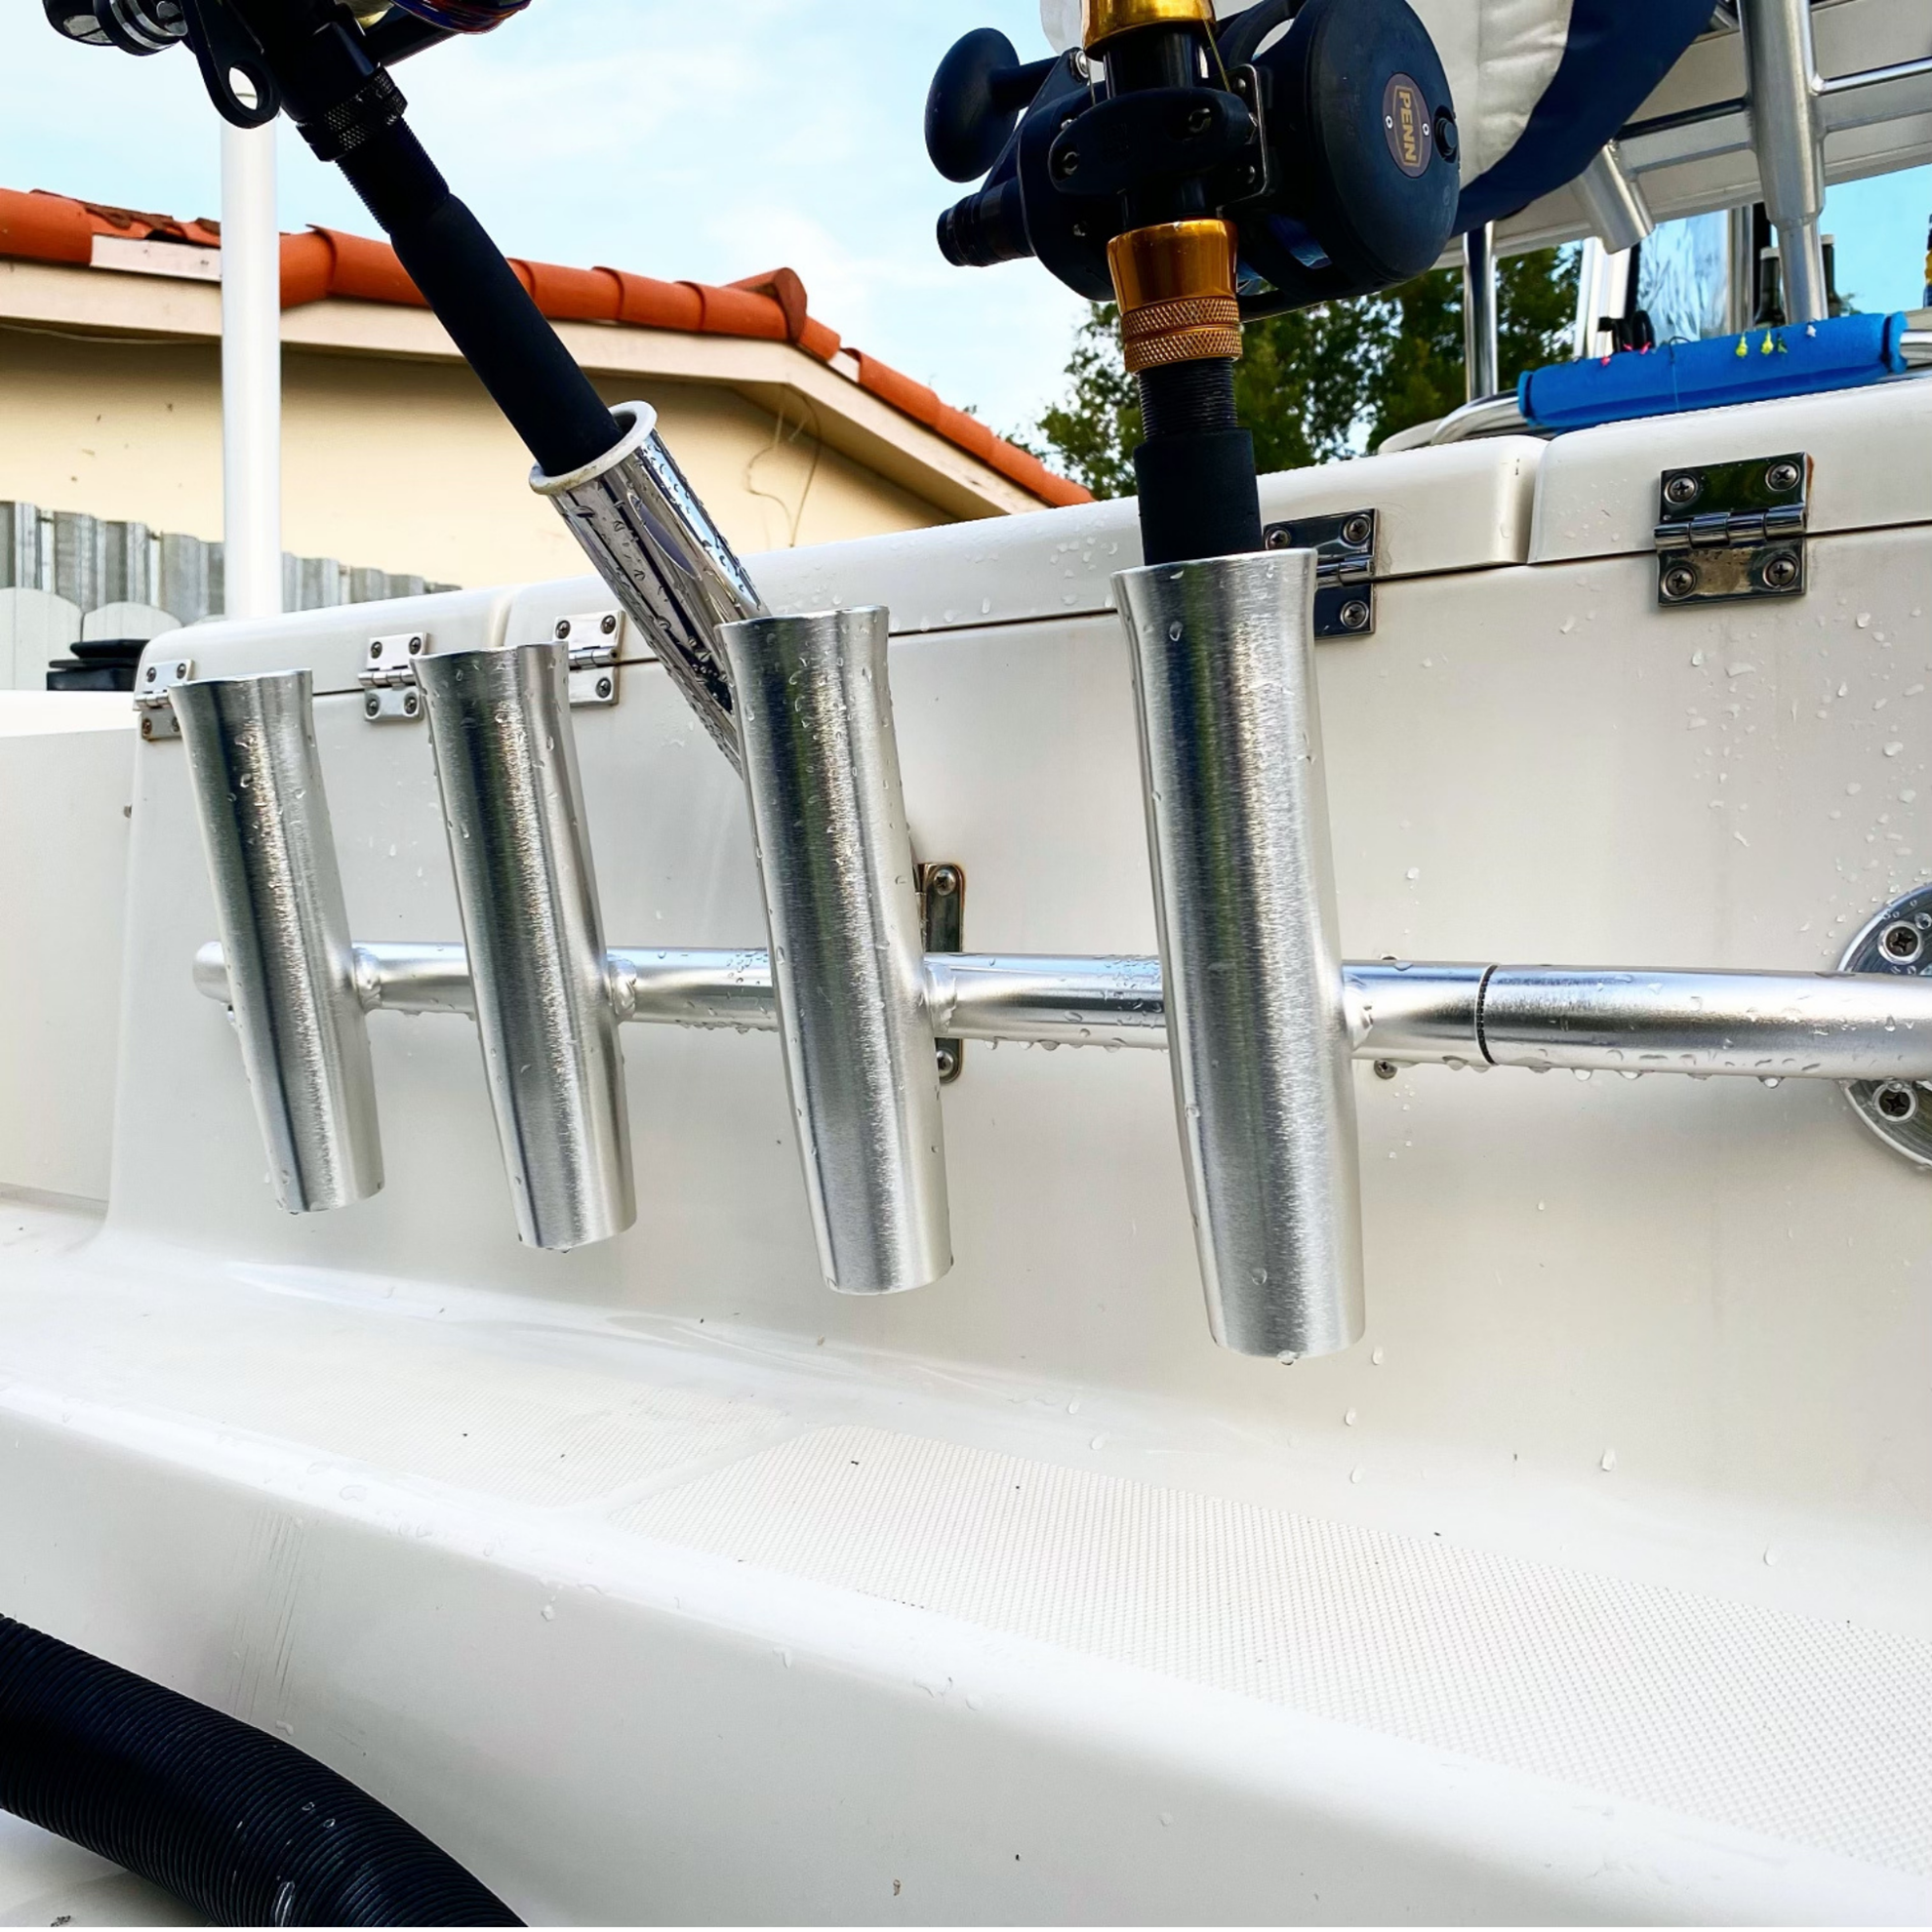 Boat Fishing Rods Stainless Steel Marine Boat Fishing Rod Holder Rack  Support For Rail 43 51mm Boat Seat Boats Parts 231201 From Huo05, $24.92